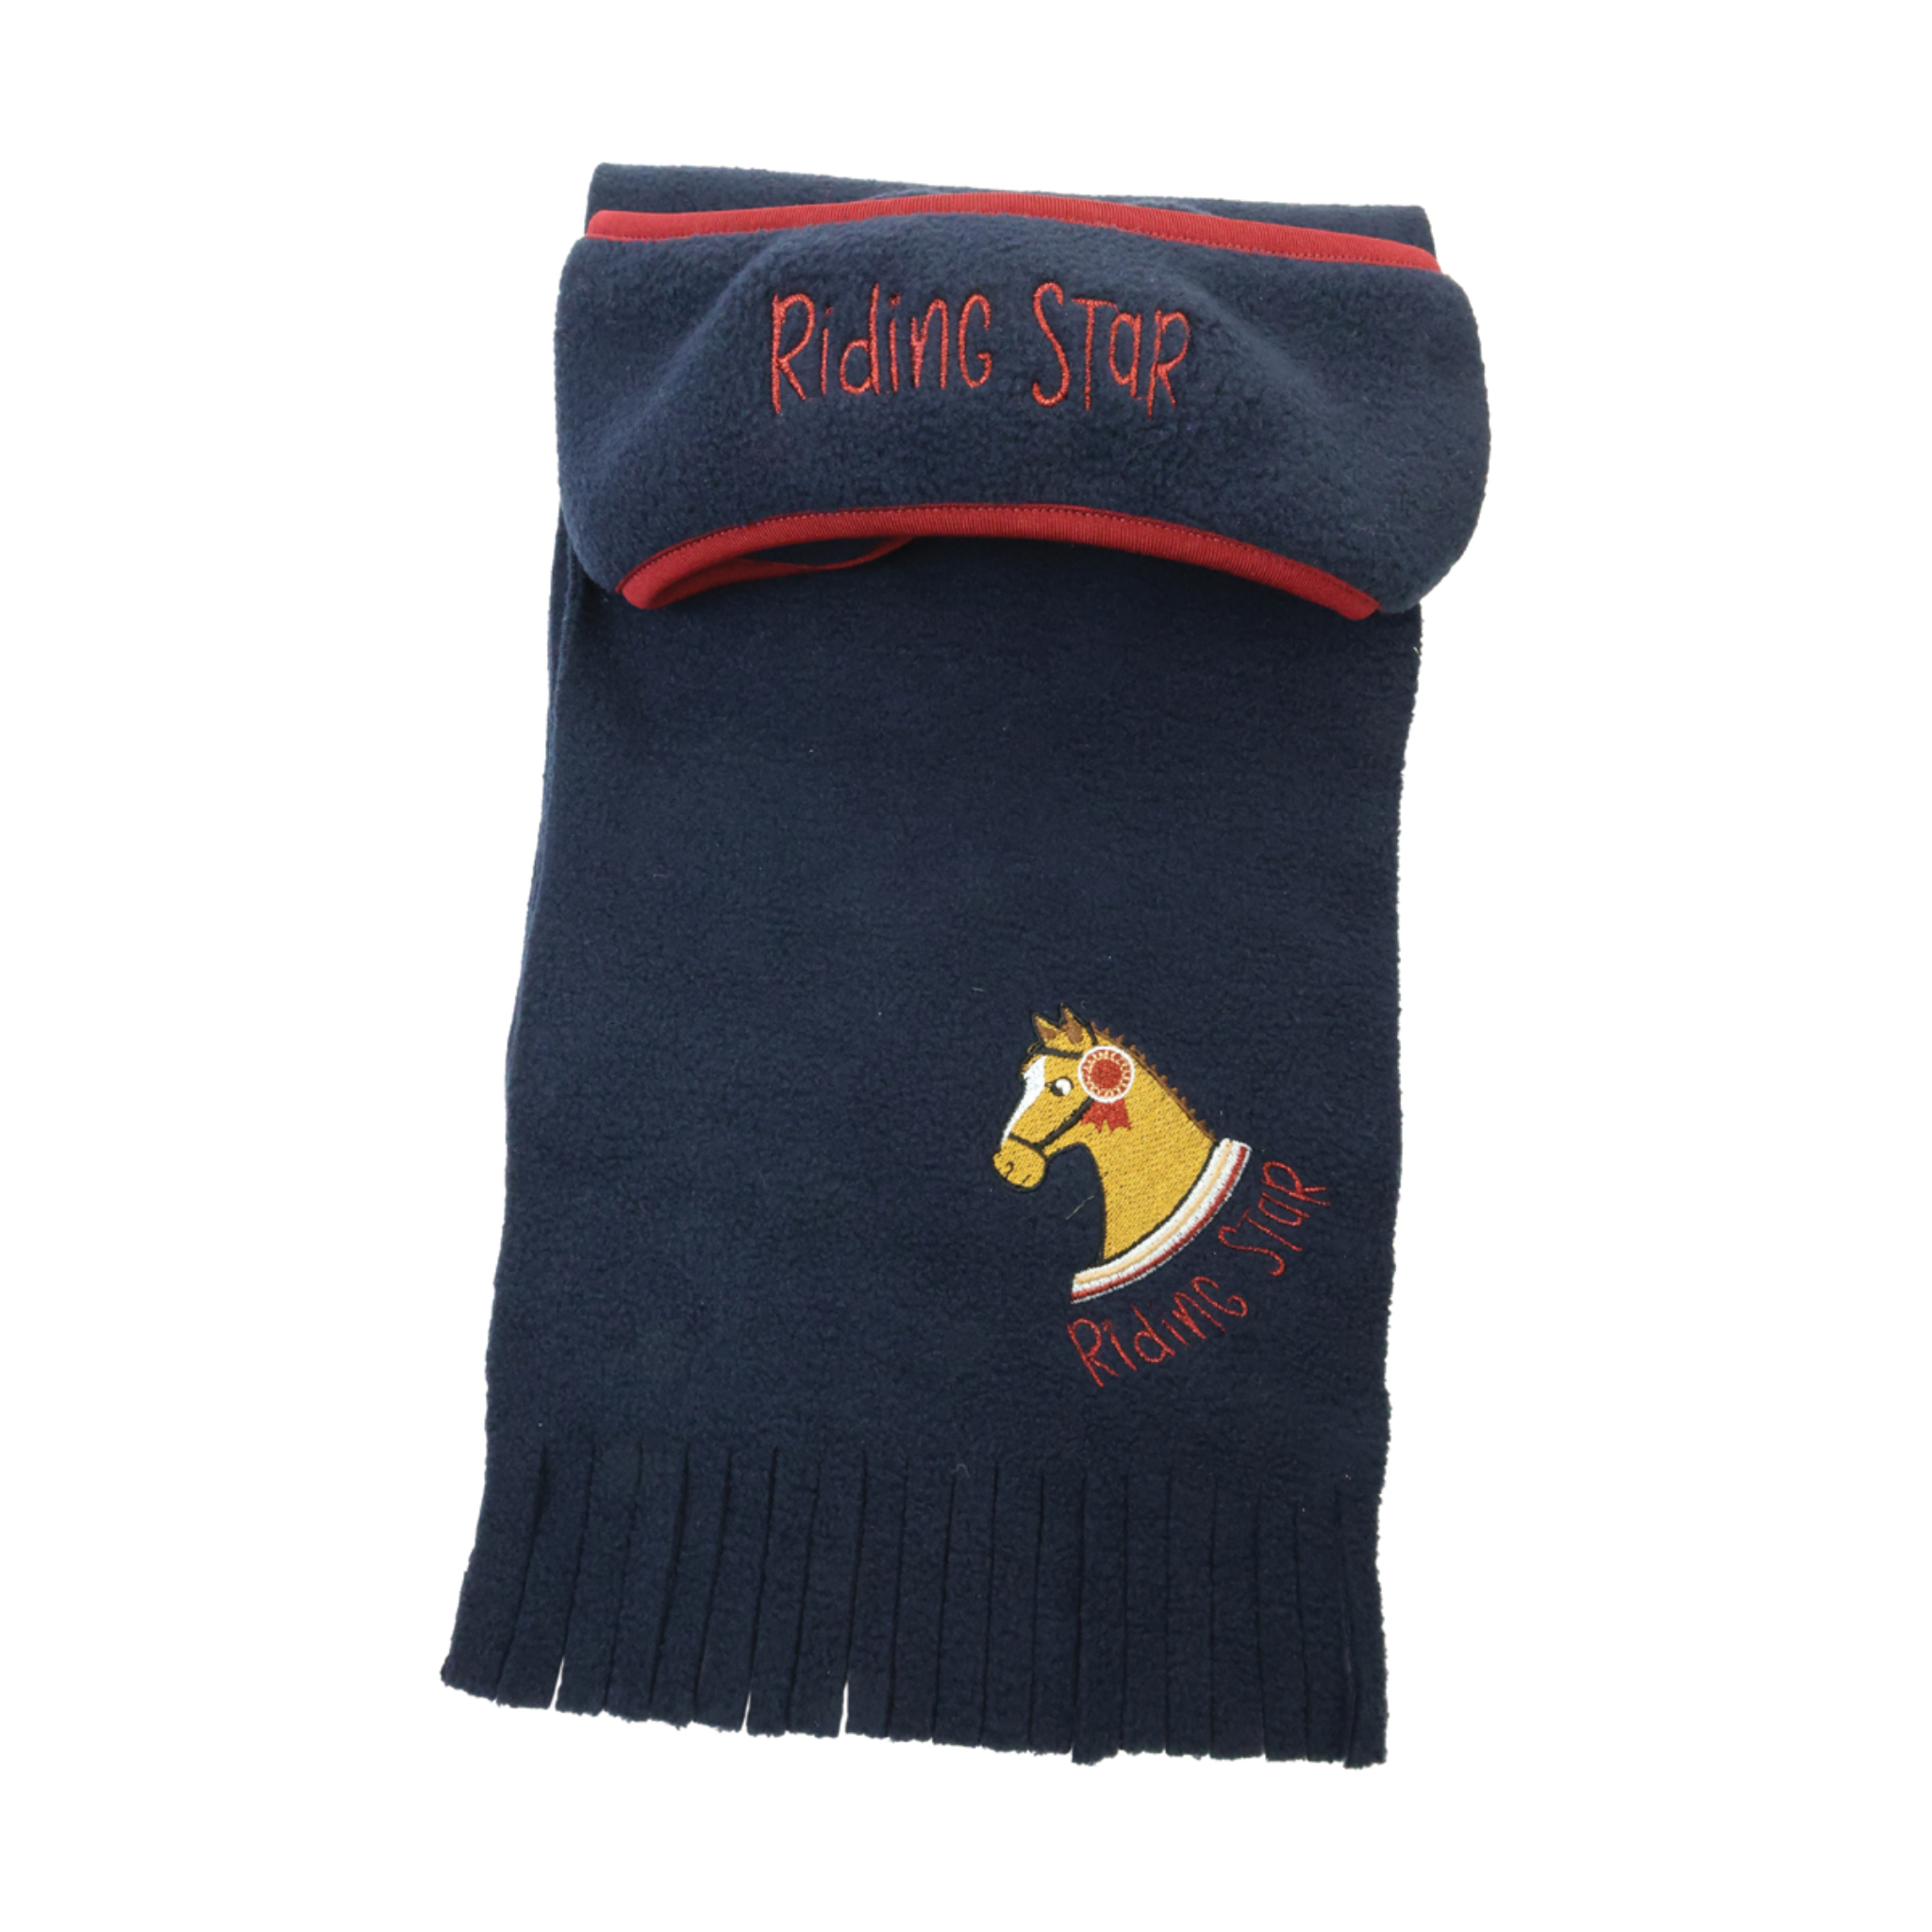 Little Rider Riding Star Collection Head Band and Scarf Set